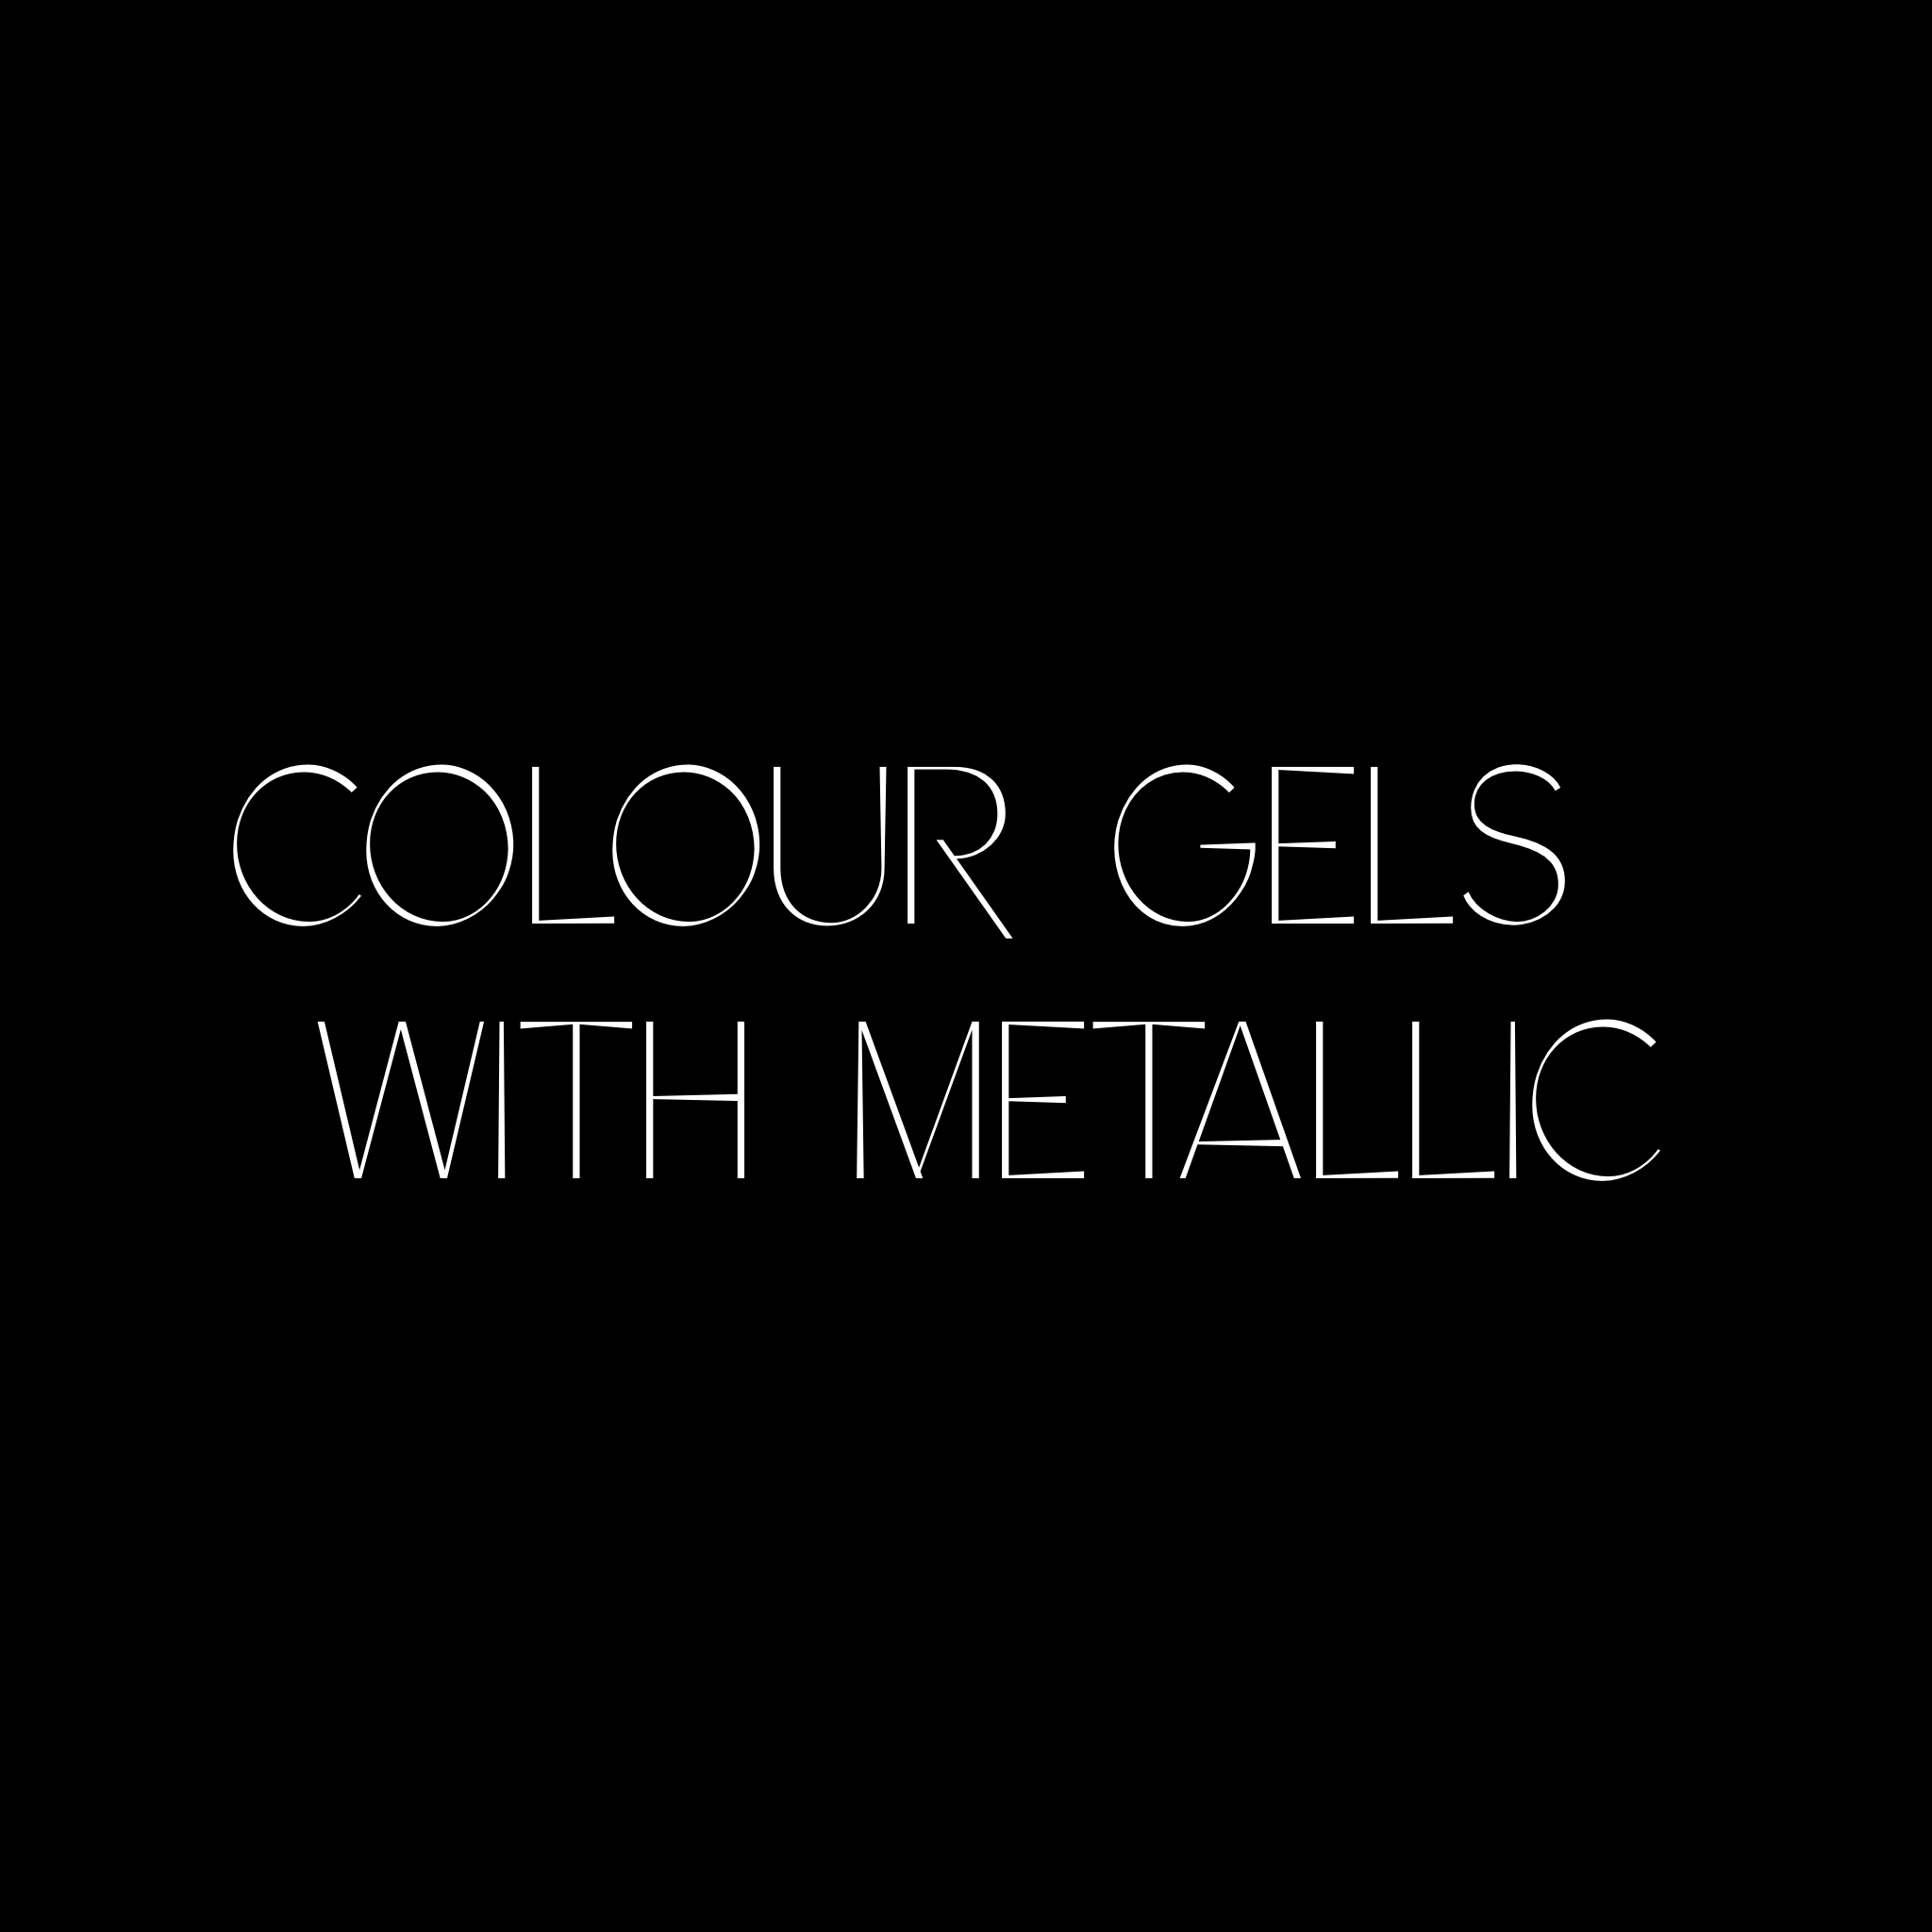 COLOUR GELS WITH METALLIC